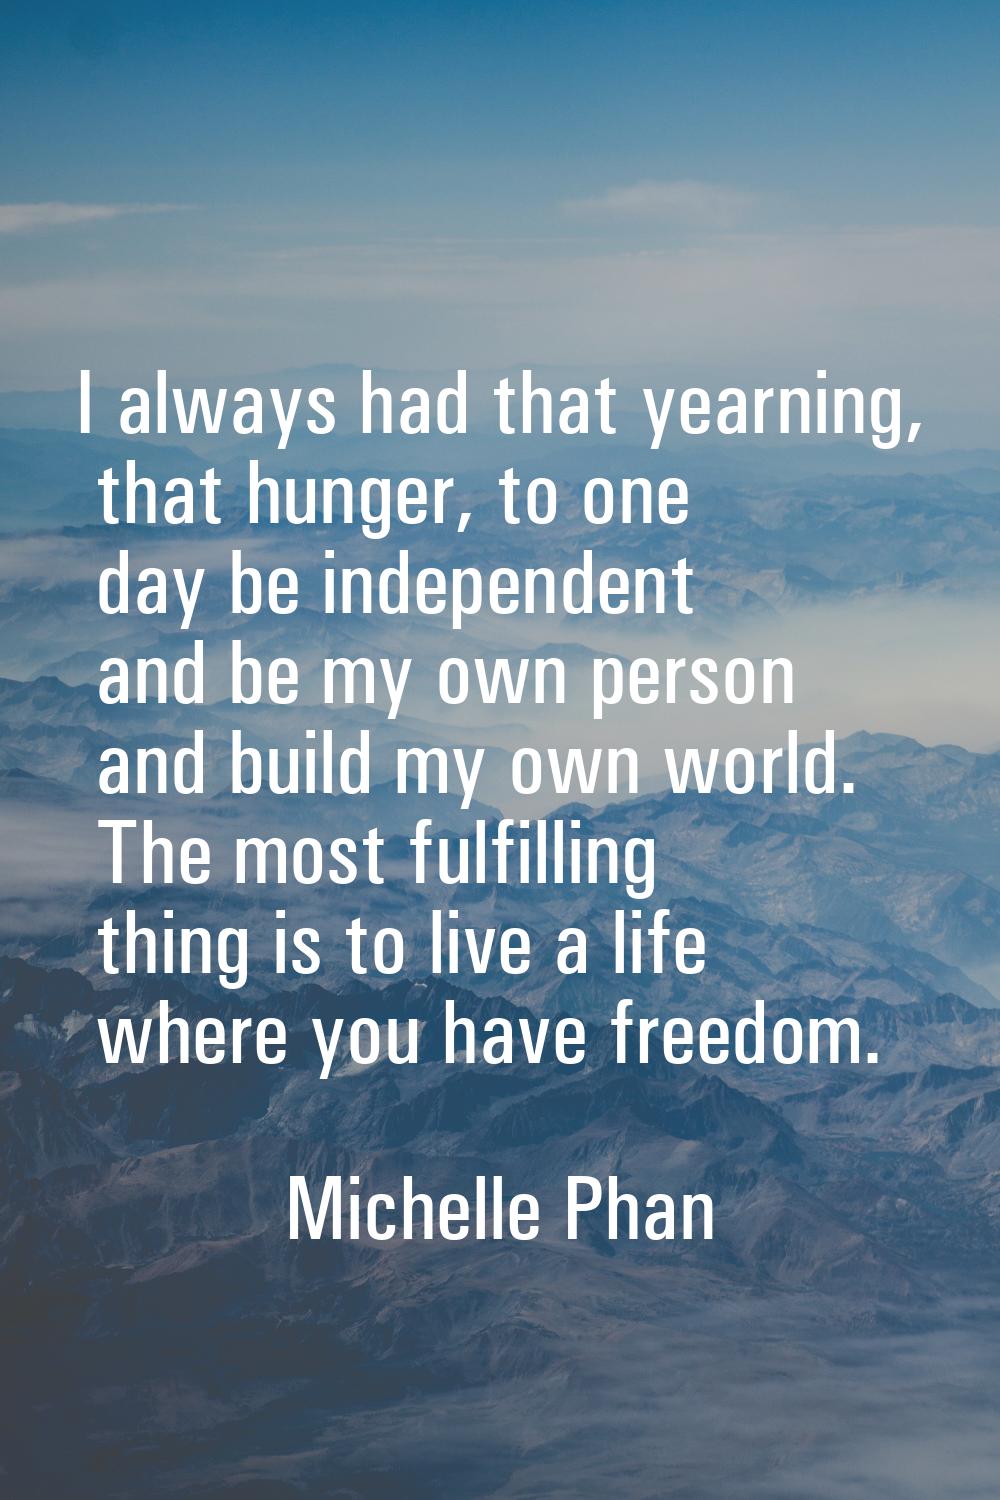 I always had that yearning, that hunger, to one day be independent and be my own person and build m